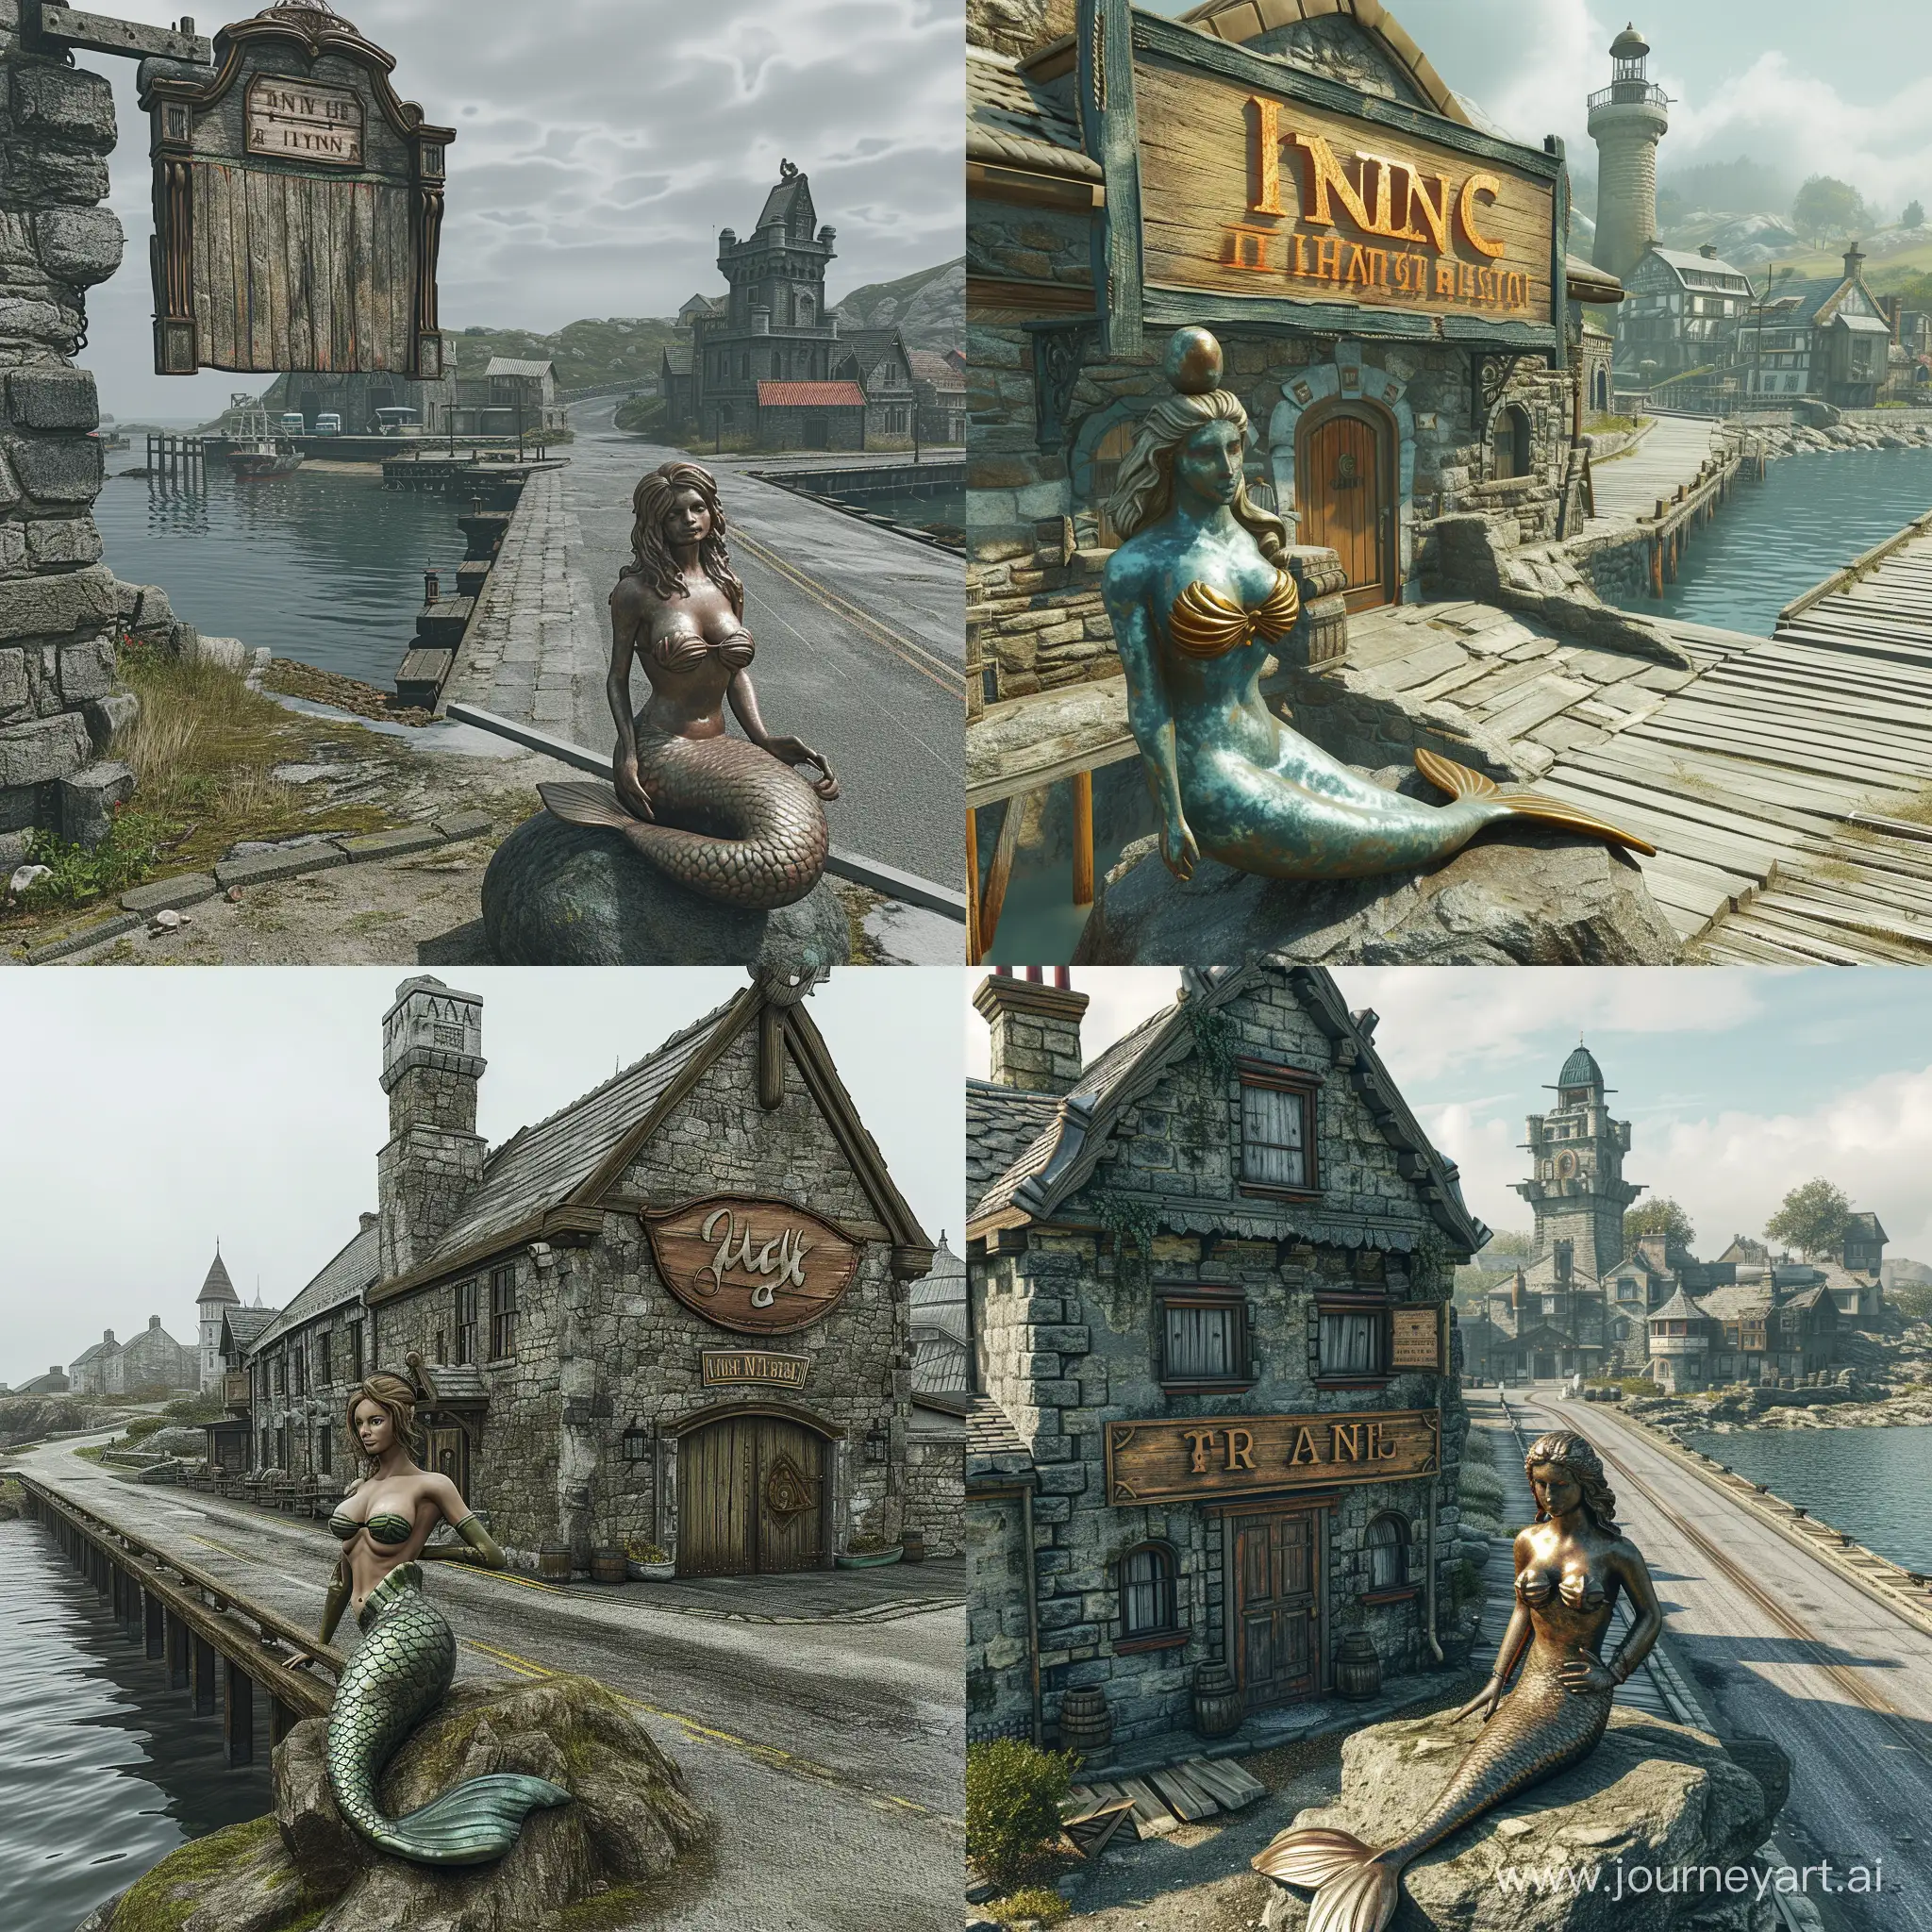 A worn down fantasy stone inn in a large military port on docks by the sea. A wooden sign hangs above inn doors, bellow to the side a beautiful topless Bronze mermaid statue. Statue is posed in a sitting on a rock in front of the inn's entrance on dock. There is a wide road between inn and sea. Behind inn and to the side there are more houses. Statues breasts have polished bronze shine. Artistic rulebook image style.